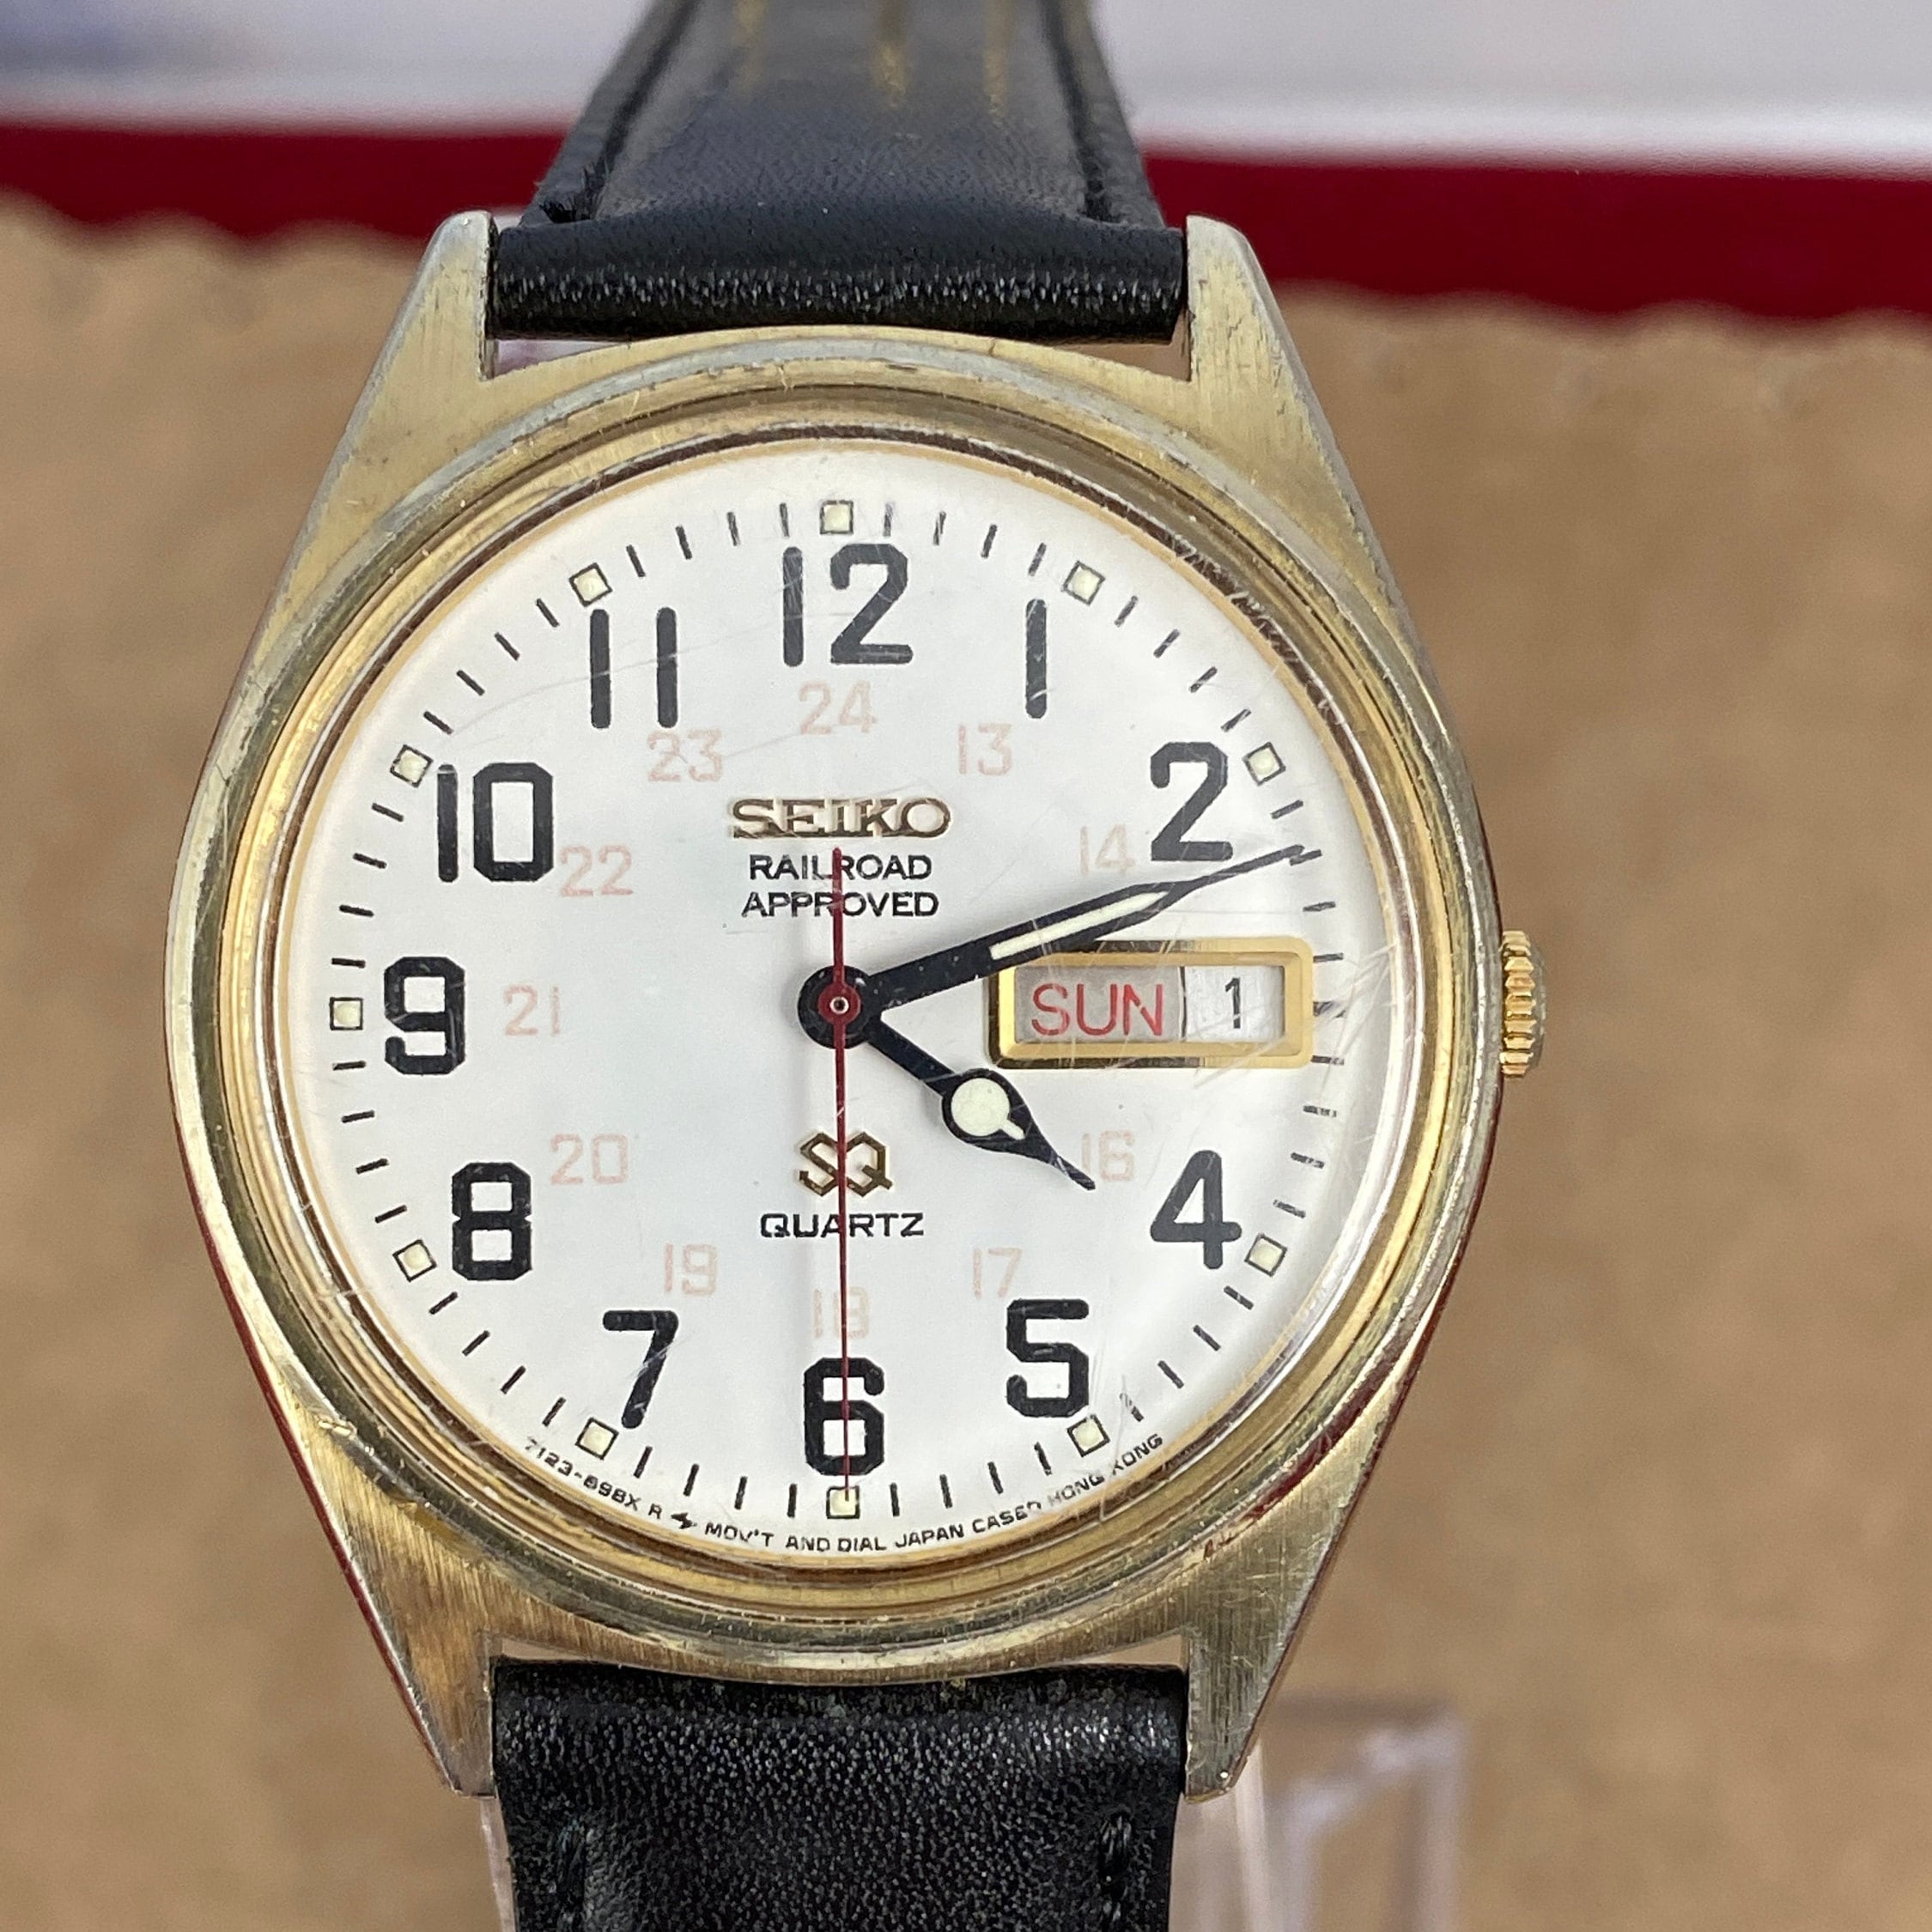 Vintage Seiko Railroad Approved Quartz Watch in Working and - Etsy